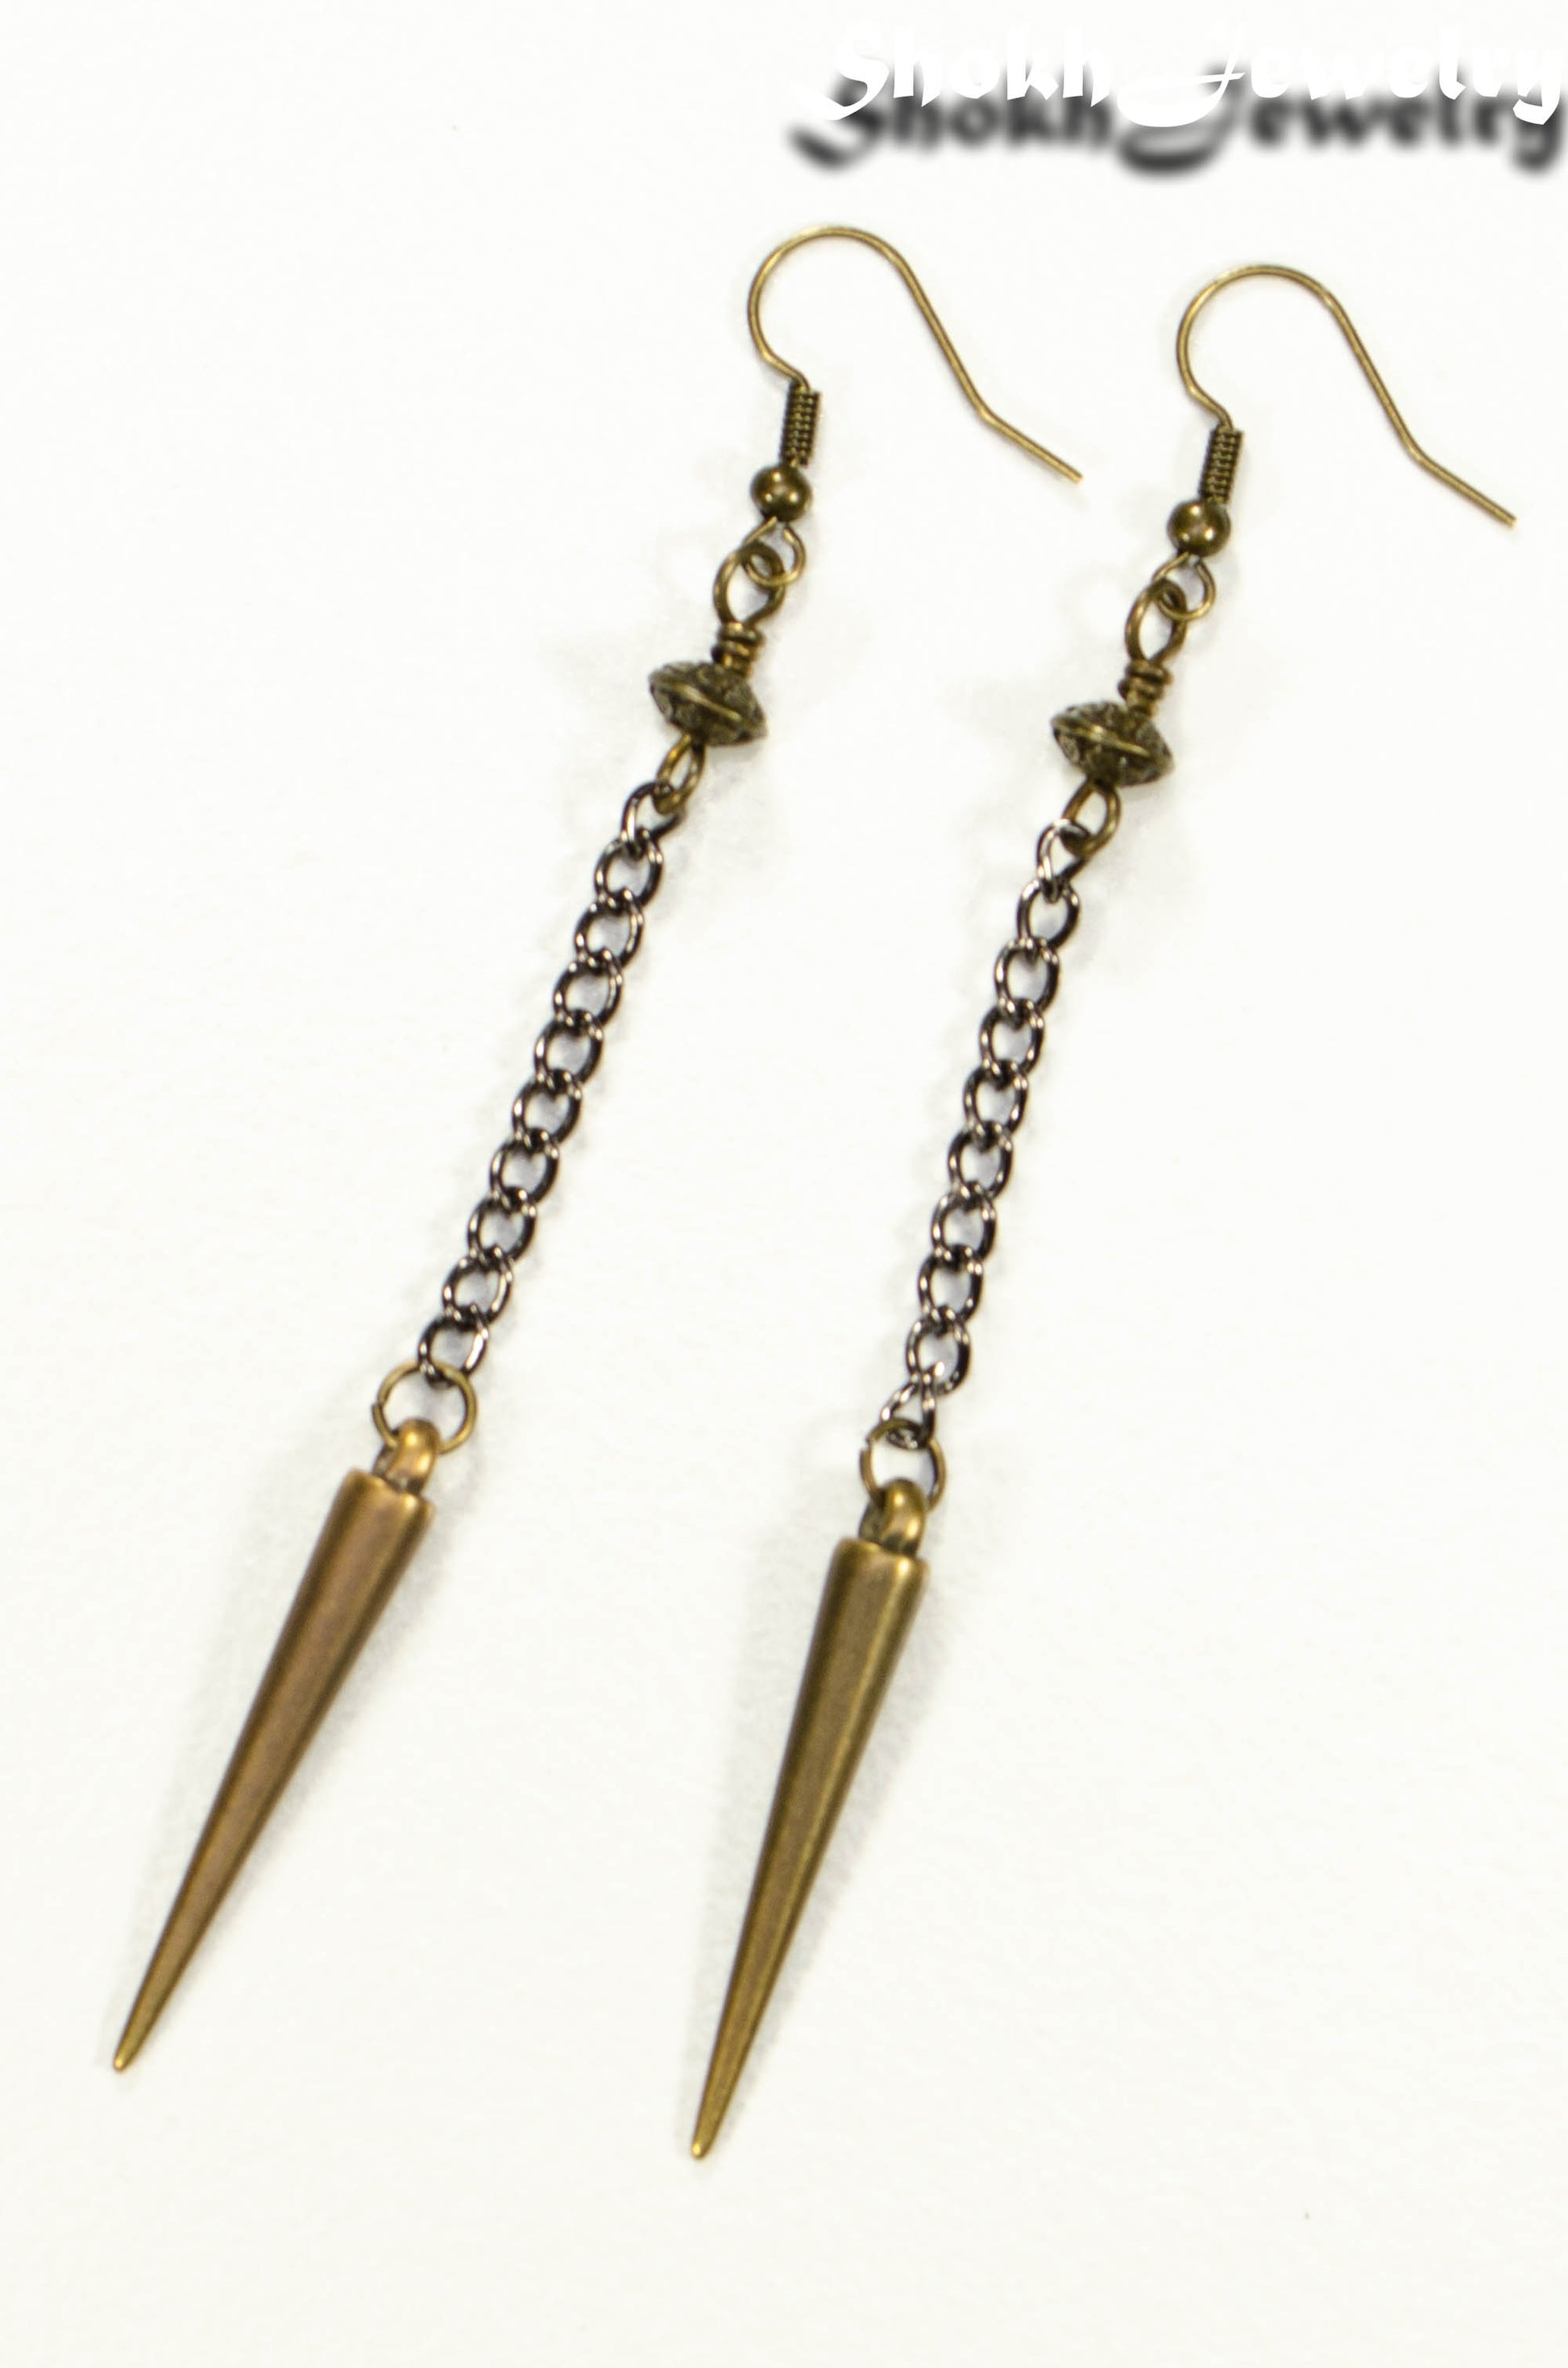 Statement chain and antique bronze spike earrings